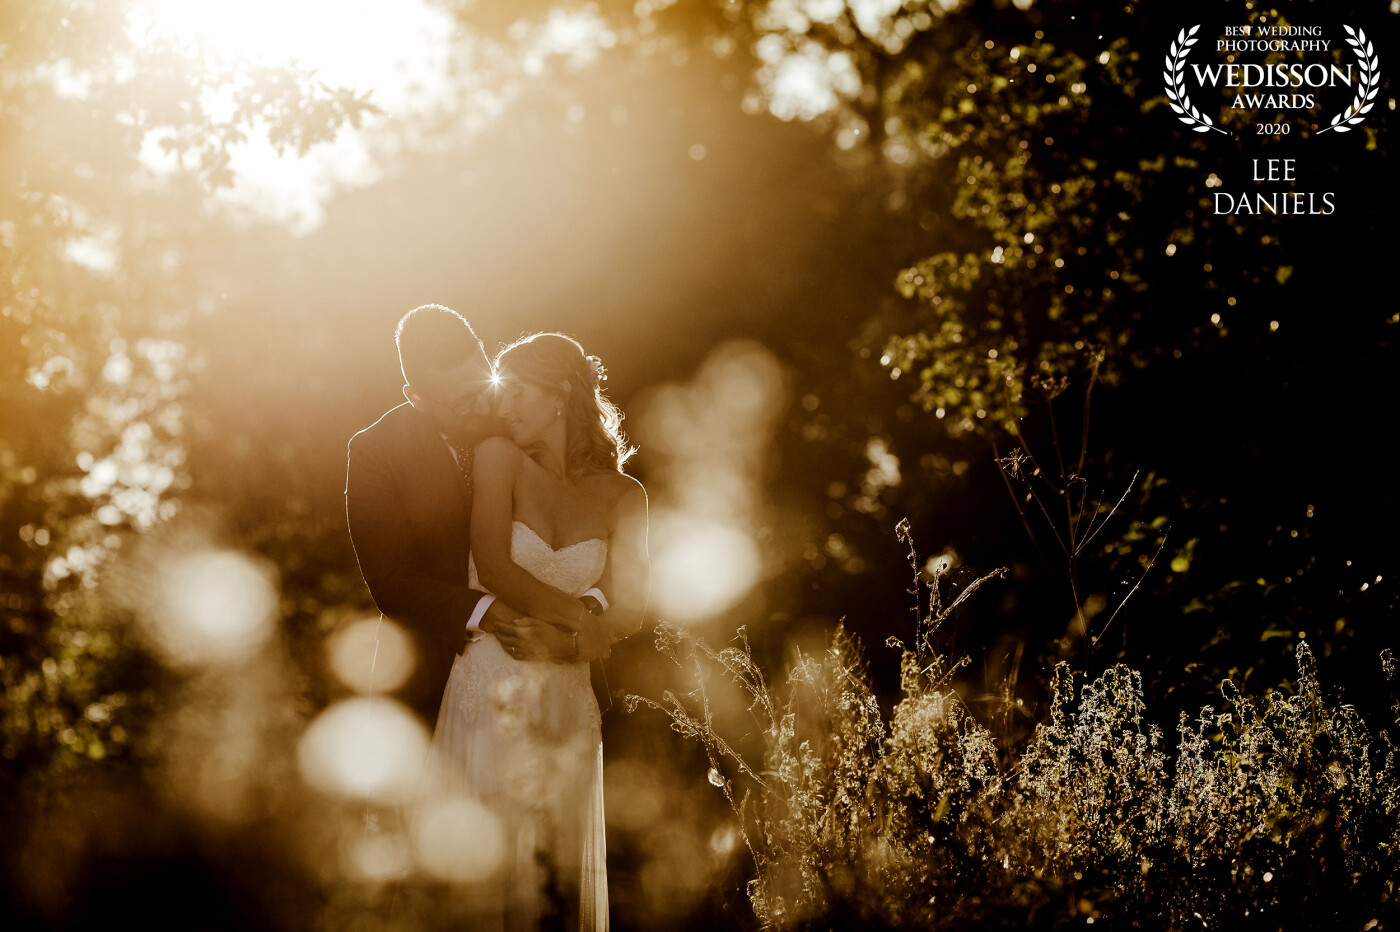 Perfect light, it just can't be beaten. It's a photographers dream when the light is just right, add a little romance and laughter and you're onto a winner. Millie & Dan adding just that at Bassmead Manor Barns.